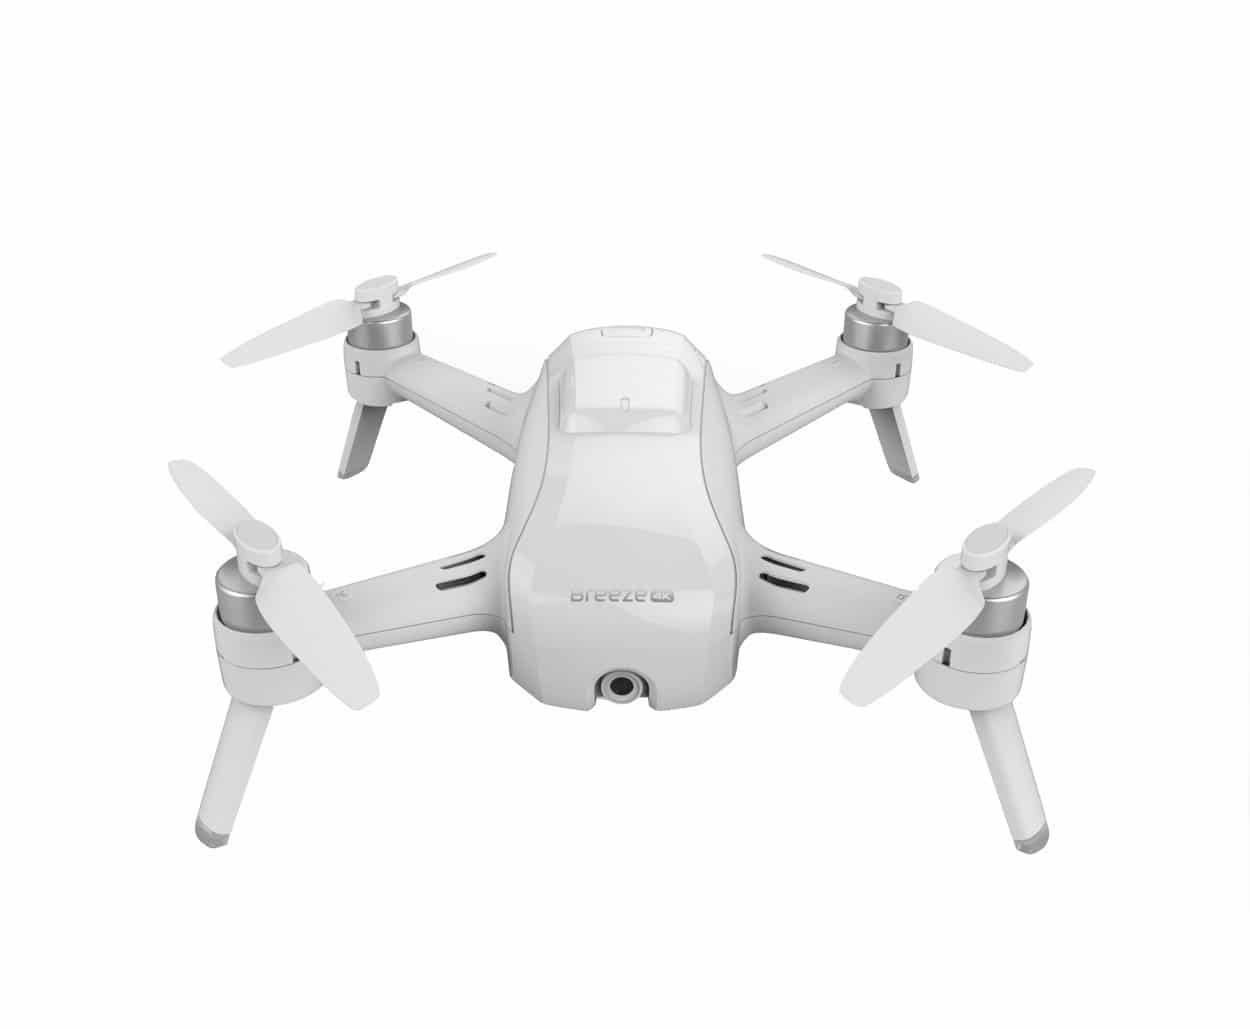 best drones for beginners, drones for beginners, best beginner drone 2017, starter drone, best beginner drone with camera, best starter drone, beginner drone with camera, good beginner drone, best beginner drone 2016, beginner drones 2016, best starter drone 2017, easy to fly drones, best entry level drone, good starter drone, best beginner drone with camera 2017, entry level drone, top drones for beginners, best drone with camera for beginners 2017, easy drone to fly, top beginner drones 2016, easiest drone to fly, best starter drones 2016, what is the best drone for beginners, best starter drone with camera, easy to fly drones with camera, beginner drone reviews, drone for beginners 2017, best video drone for beginners, entry level drone with camera, easiest drone to fly for beginners, small drone with camera, best beginner drone with camera, best drone for the money, rc drone with camera, remote control drone, nice drones, drones for adults, easy to fly drones, best beginner drone 2017, remote control drone with camera, mini drone with camera, best starter drone, best drones with camera, easiest drone to fly, best budget drone, starter drone, best affordable drone, best drones, best cheap drone with camera, good beginner drone, affordable drones, cheap drones with camera, good drones with camera, flying camera drone, best inexpensive drone, best camera drone for the money, remote drone with camera, cheap drones for sale with camera, easy drone to fly, best beginner photography drone, entry level photography drone, good cheap drones, drone with camera reviews, best mini drone with camera, outdoor drone with camera, rc drone with live camera, drone with live video, best rc drones, best value drone, best entry level drone, inexpensive drones, drone with live camera, rc drone, drone with video, outdoor drone, best starter drone with camera, best drones 2017, cheap drones, best beginner drone with camera, best starter drone, starter drone, beginner drone with camera, best affordable drone, easy to fly drones, easiest drone to fly, affordable drone with camera, best beginner drone 2016, best entry level drone, inexpensive drones, entry level drone, top drones for beginners, easy drone to fly, cheap drones with camera, best affordable drone with camera, easy to fly drones with camera, entry level drone with camera, best starter drone with camera, best beginner quadcopter, easiest to fly drone, what is the best drone for beginners, starter drone with camera, best video drone for beginners, beginner drone reviews, small drone with camera, best beginner photography drone, best drone camera for beginners, best inexpensive drone with camera, best cheap drone, cheap but good drones, top rated drones for beginners, best drone without camera, best drone to learn to fly, easiest mini drone to fly, drone entry level, best drones with camera, best drones, drone price, best drones for sale, best drone for the money, how much is a drone, drone with camera for sale, best drones 2017, how much does a drone cost, small drone with camera, drone cost, cool drones, best video drone, top drones, good drones, drone brands, top 10 drones, top drones for sale, best fpv drone, drone comparison, hobby drones, drone camera price, best drone on the market, drone.com, best buy drones, drone deals, best starter drone, drone buying guide, drone reviews, best value drone, how much is a drone with camera, video drones for sale, best dji drone, rc drones for sale, best selling drones, what drone to buy, phantom drones for sale, buy drone with camera, best personal drones for sale, top drone brands, flying drones for sale, drone models, what is the best drone, high end drones, used drones for sale, high quality drones, cheap phantom drone, what is a good drone to buy, best drone ever, drone reviews 2016, nice drones for sale, best ar drone, dji drones for sale, the best drone to buy, first drone, top ten drones, cheapest 4k drone, different types of drones for sale, top 5 drones, drone 2017, best beginner drone 2016, nice drones, top selling drones, best affordable drone, what's the best drone, latest drone, hobby grade drone, drones for adults, best hobby drones, best drone camera 2016, how much a drone cost, best mid priced drone, most popular drones, drone with fpv, popular drones, best phantom drone, drone ratings, top 10 drones for sale, entry level drone, good cheap drones, best drone under 150, pov drone, best drones under 100, outdoor drone, inexpensive quadcopters, cheap rc quadcopter, small cheap drones, cheap drone with good camera, best drone for the money, cheap quadcopter, best low cost drone, cheap uav drone, best cheap aerial photography drone, cheap live camera drone, cheap video drone, drone low price, cheap mini drones, best drone deals, cheap drone for aerial photography, best budget camera drone, inexpensive fpv quadcopter, low cost quadcopter, best beginner fpv drone,outdoor drone with camera, budget drone, beginner fpv drone, cheap racing drone, quadcopter drone, best budget fpv quadcopter, cheap rc drones, best training quadcopter, cheap drones with hd camera, best low price drone, best affordable drones 2017, cheap but good drones, good starter drone, starter drone, best starter drone with camera, what is the best drone for beginners, best video drone for beginners, entry level drone with camera, to rated drones for beginners, beginner drone reviews, drones for adults, best mini drone for beginners, best rc drones